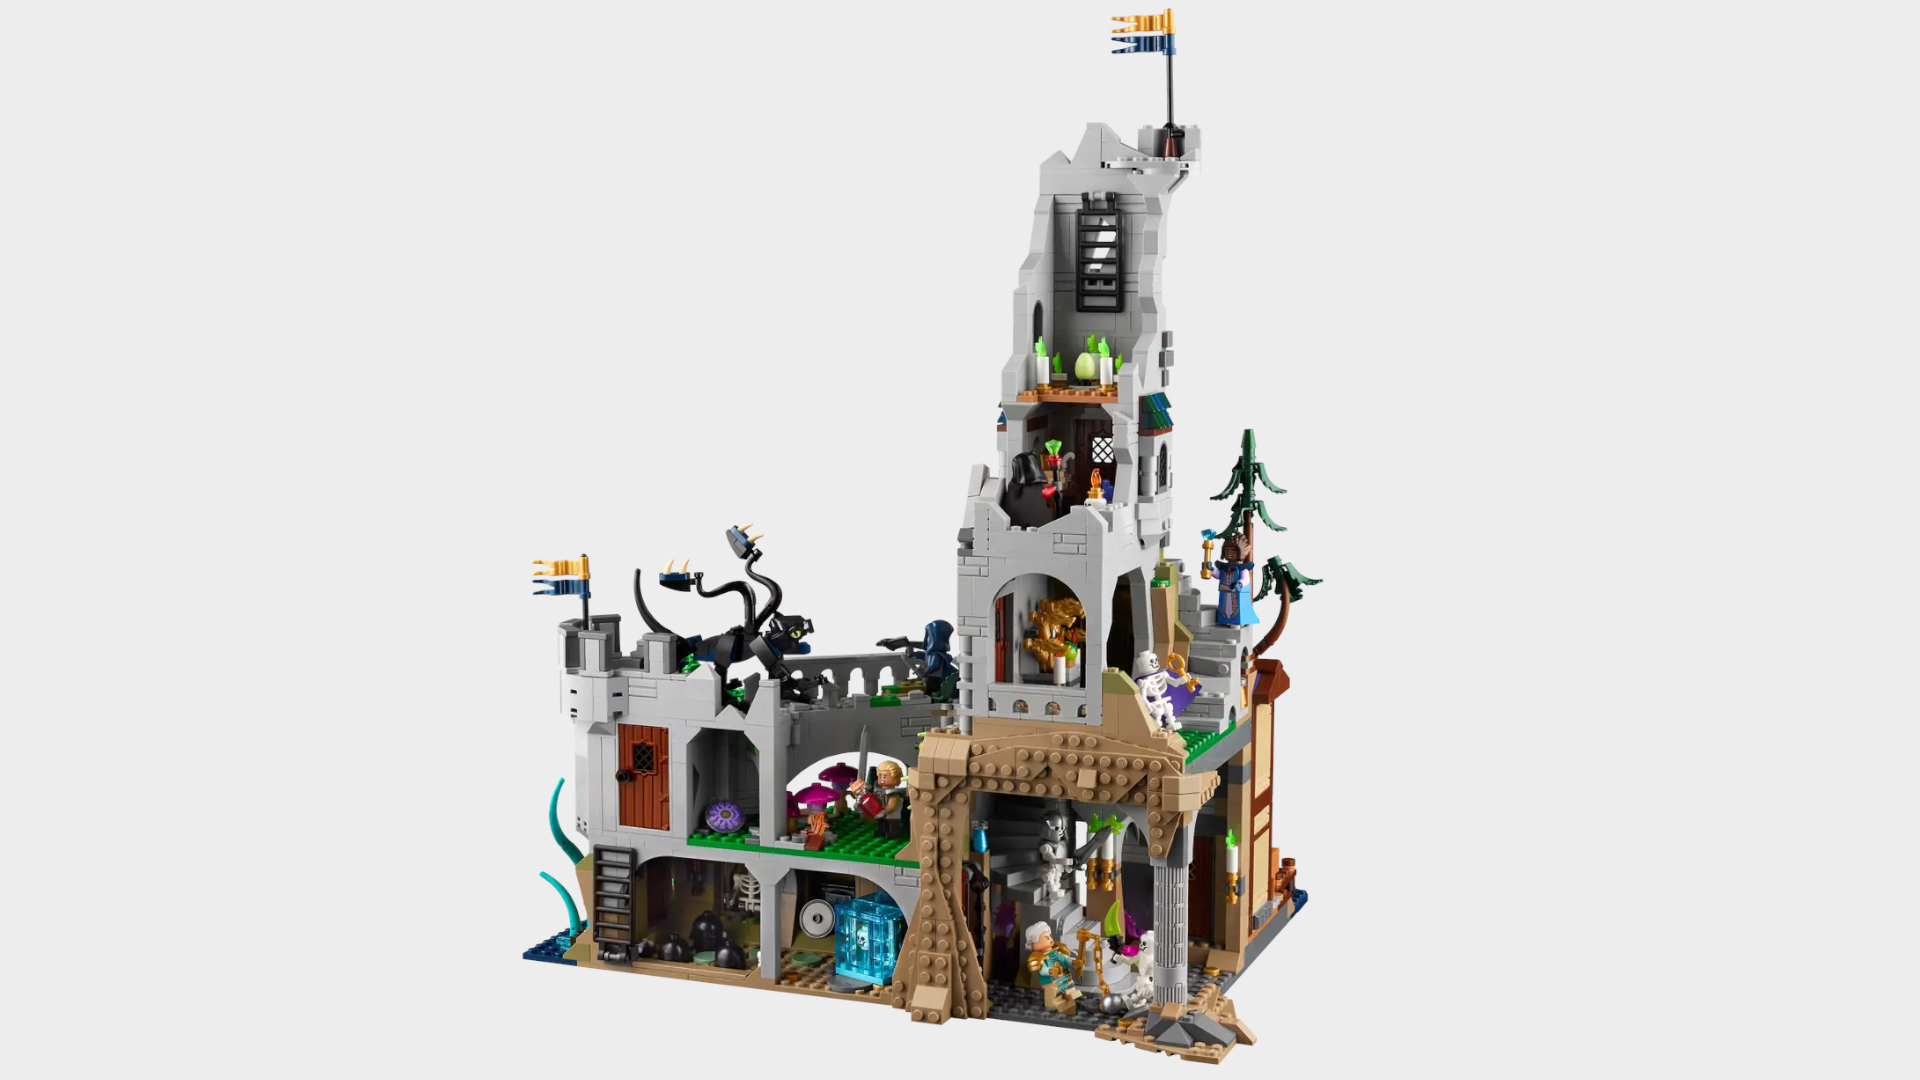 The back of the Lego D&D set on a plain background